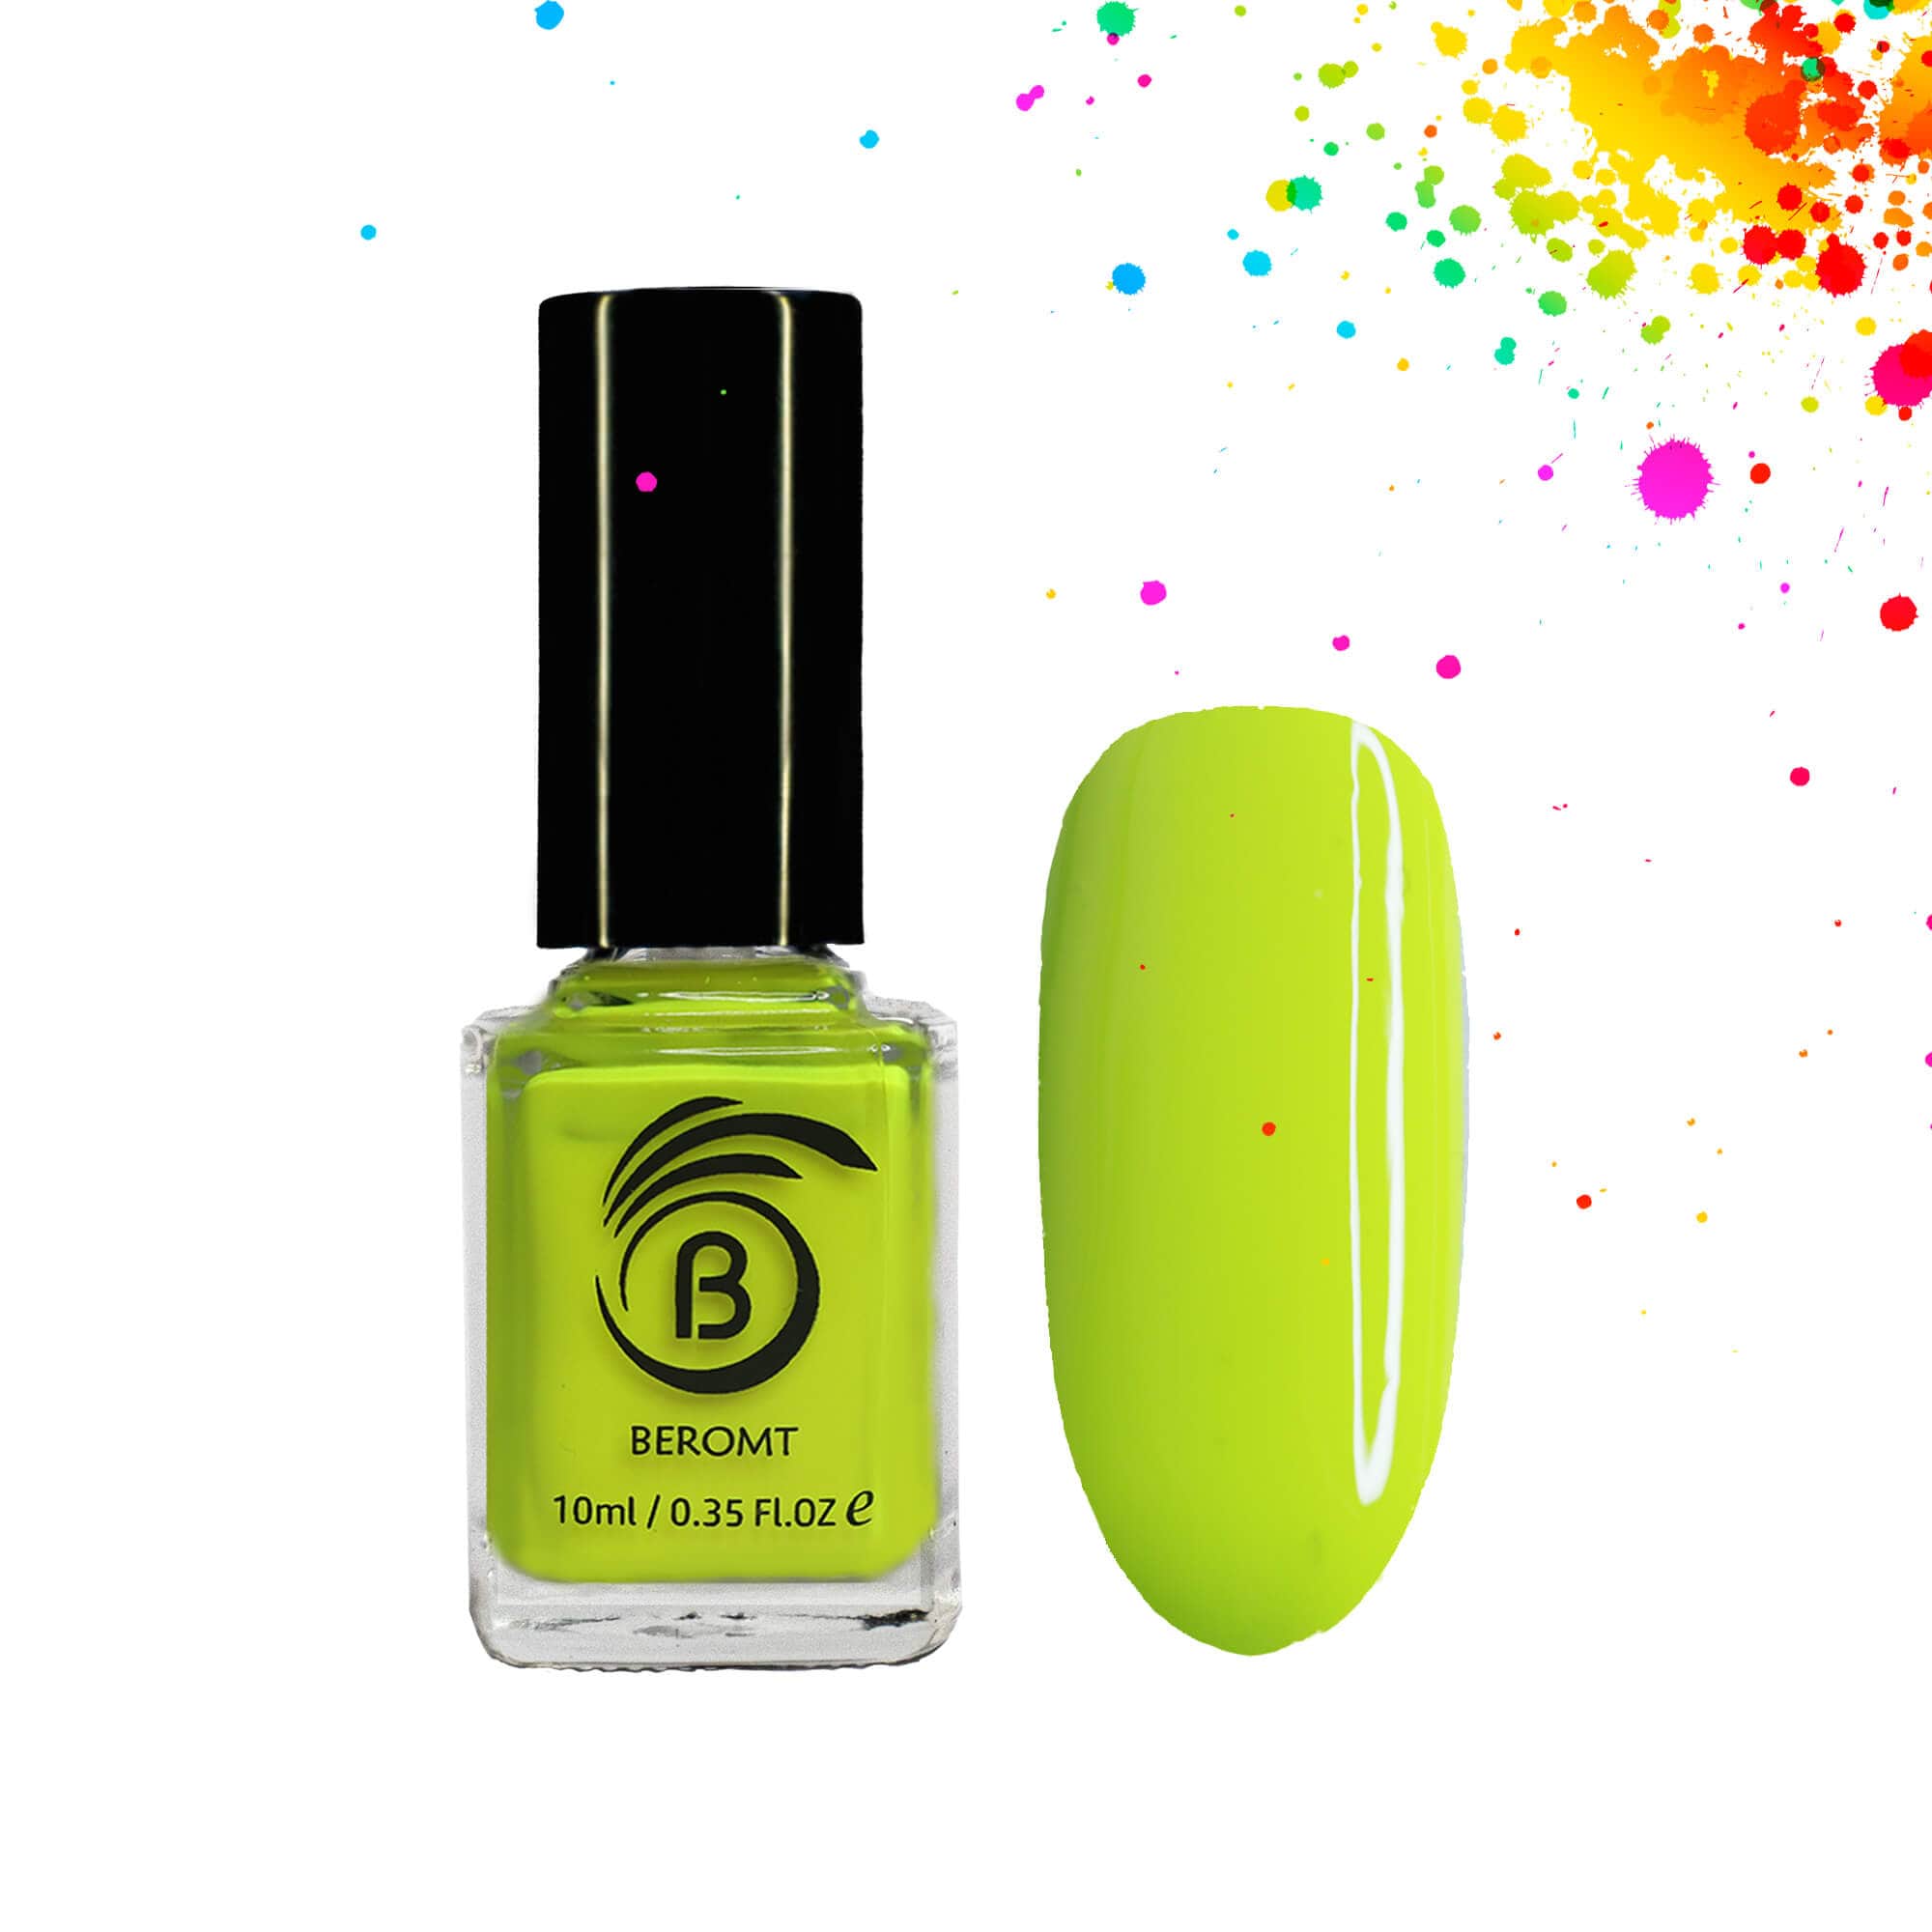 30 Super-Bright Neon Nail Ideas That Are an Instant Mood Boost